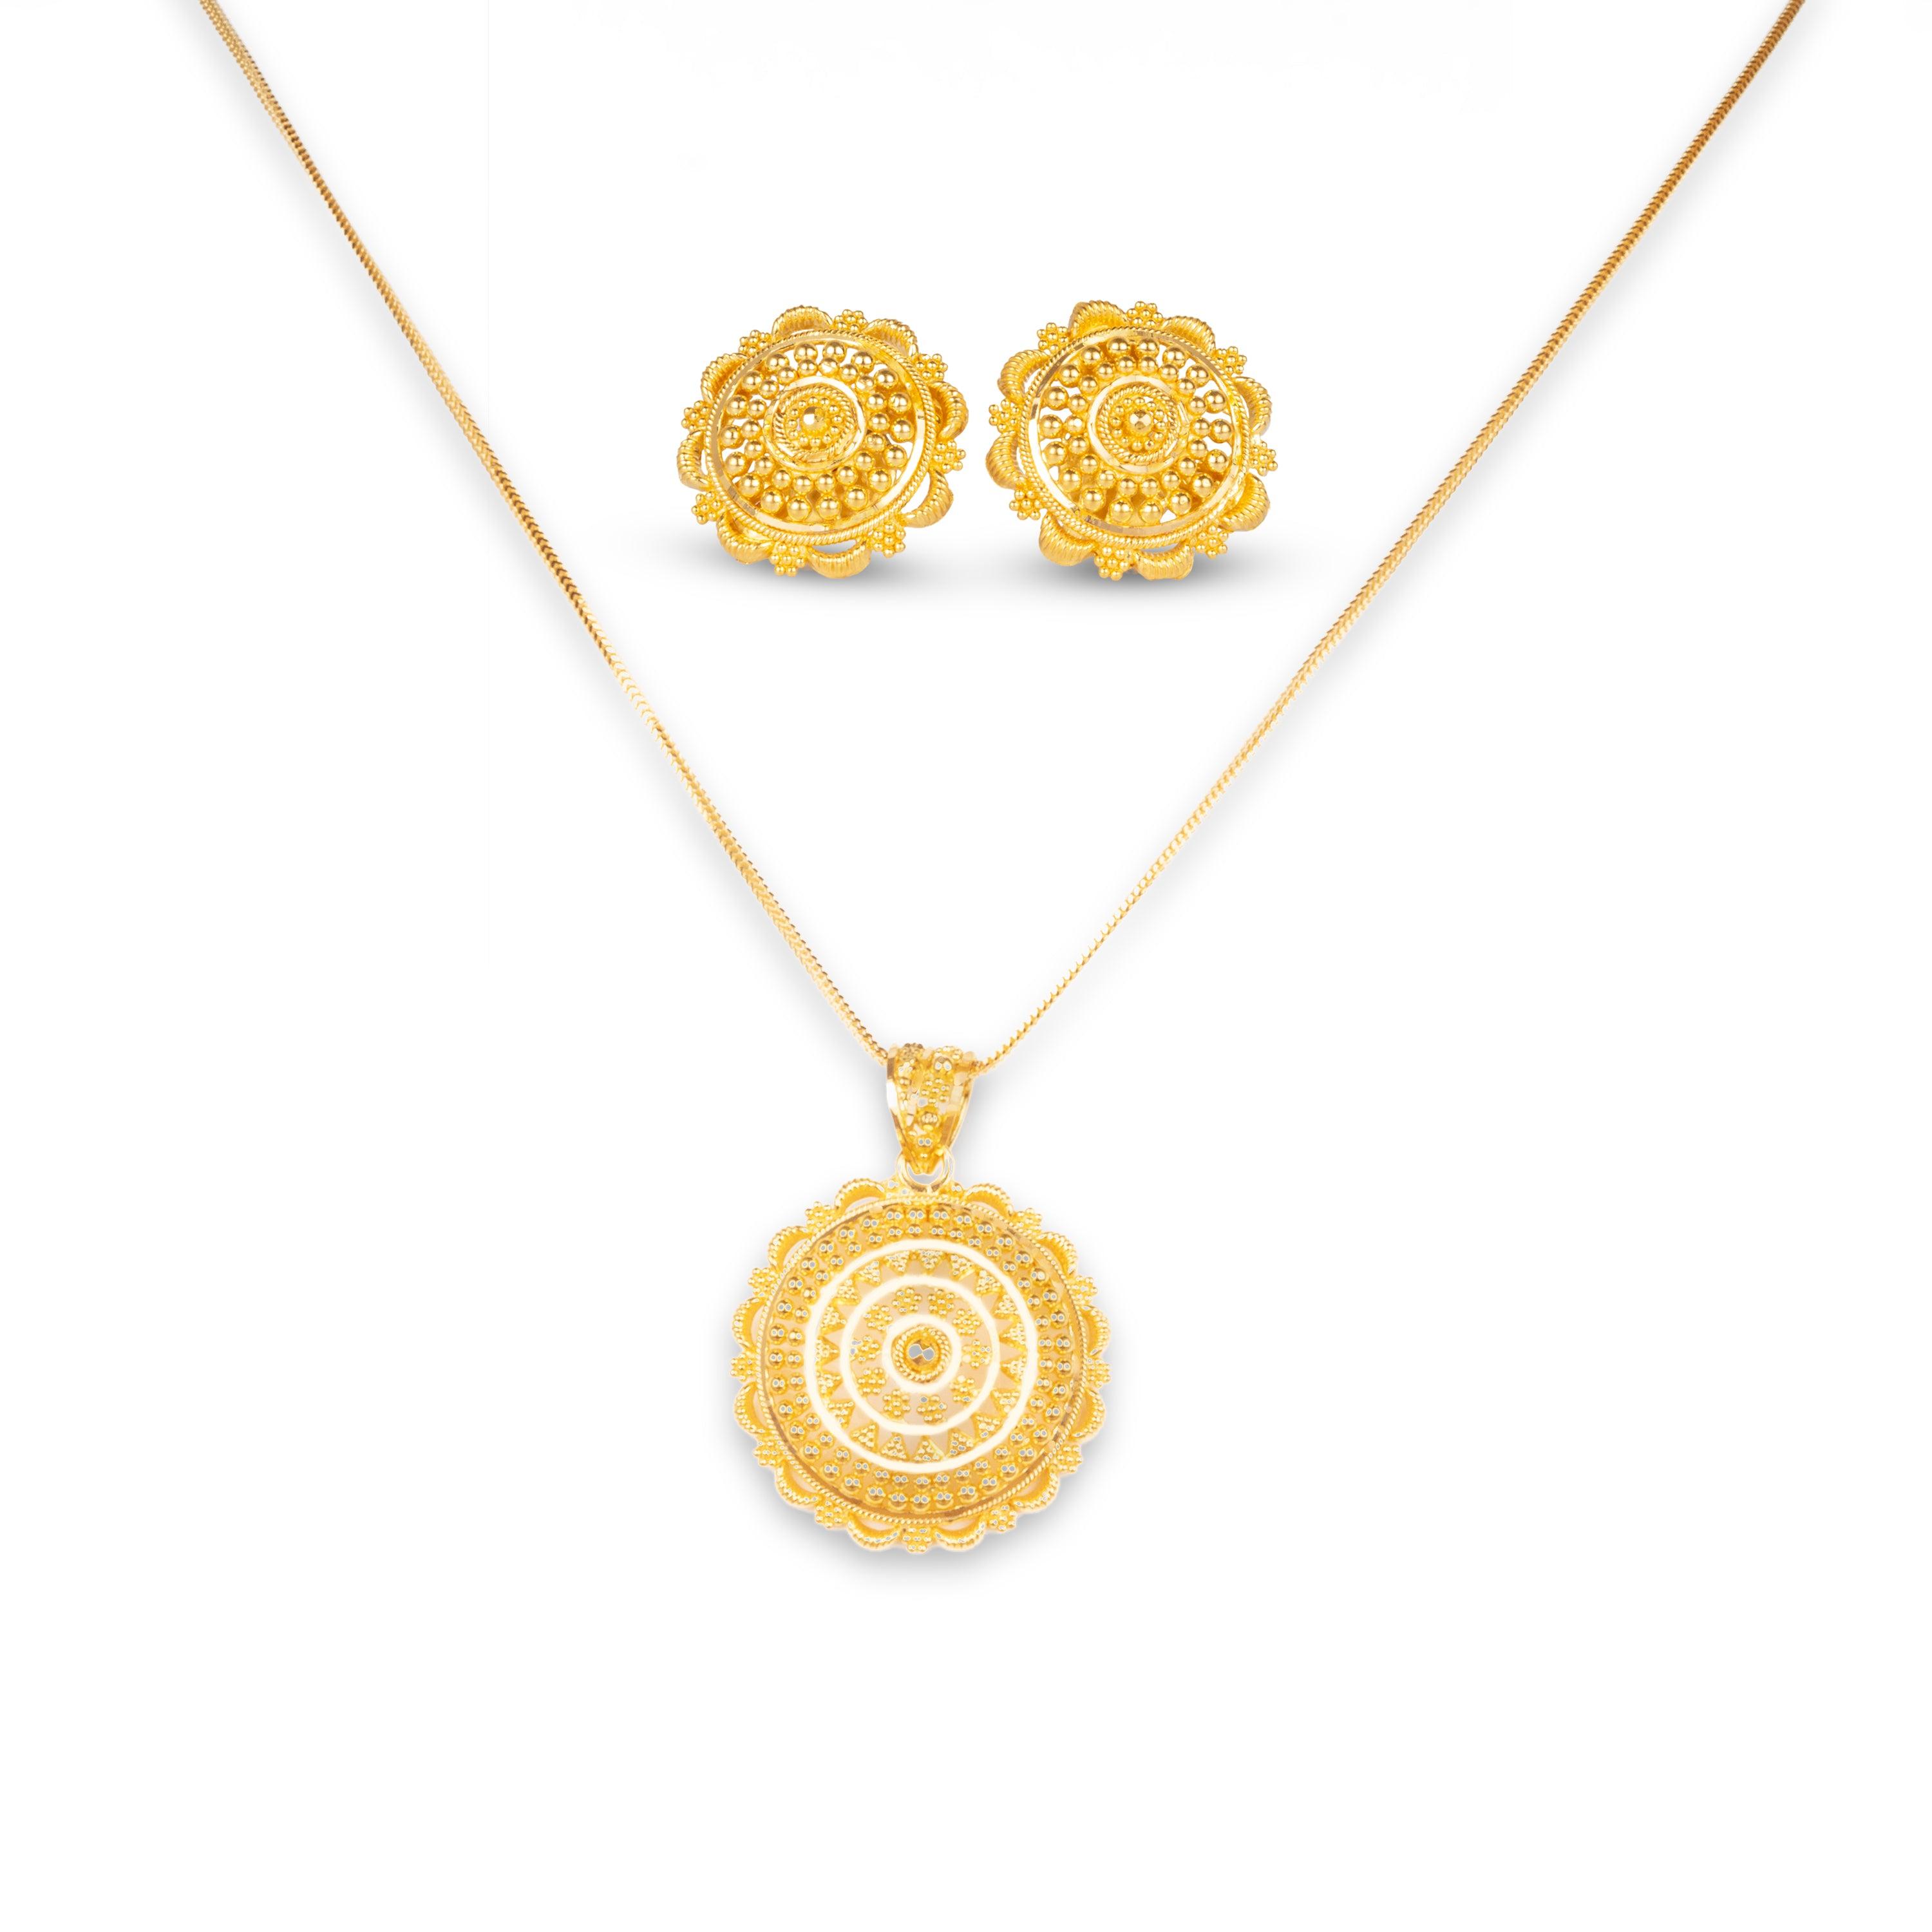 22ct Gold Set with Filigree Work (Pendant + Chain + Stud Earrings) (13.5g)-7936 - Minar Jewellers